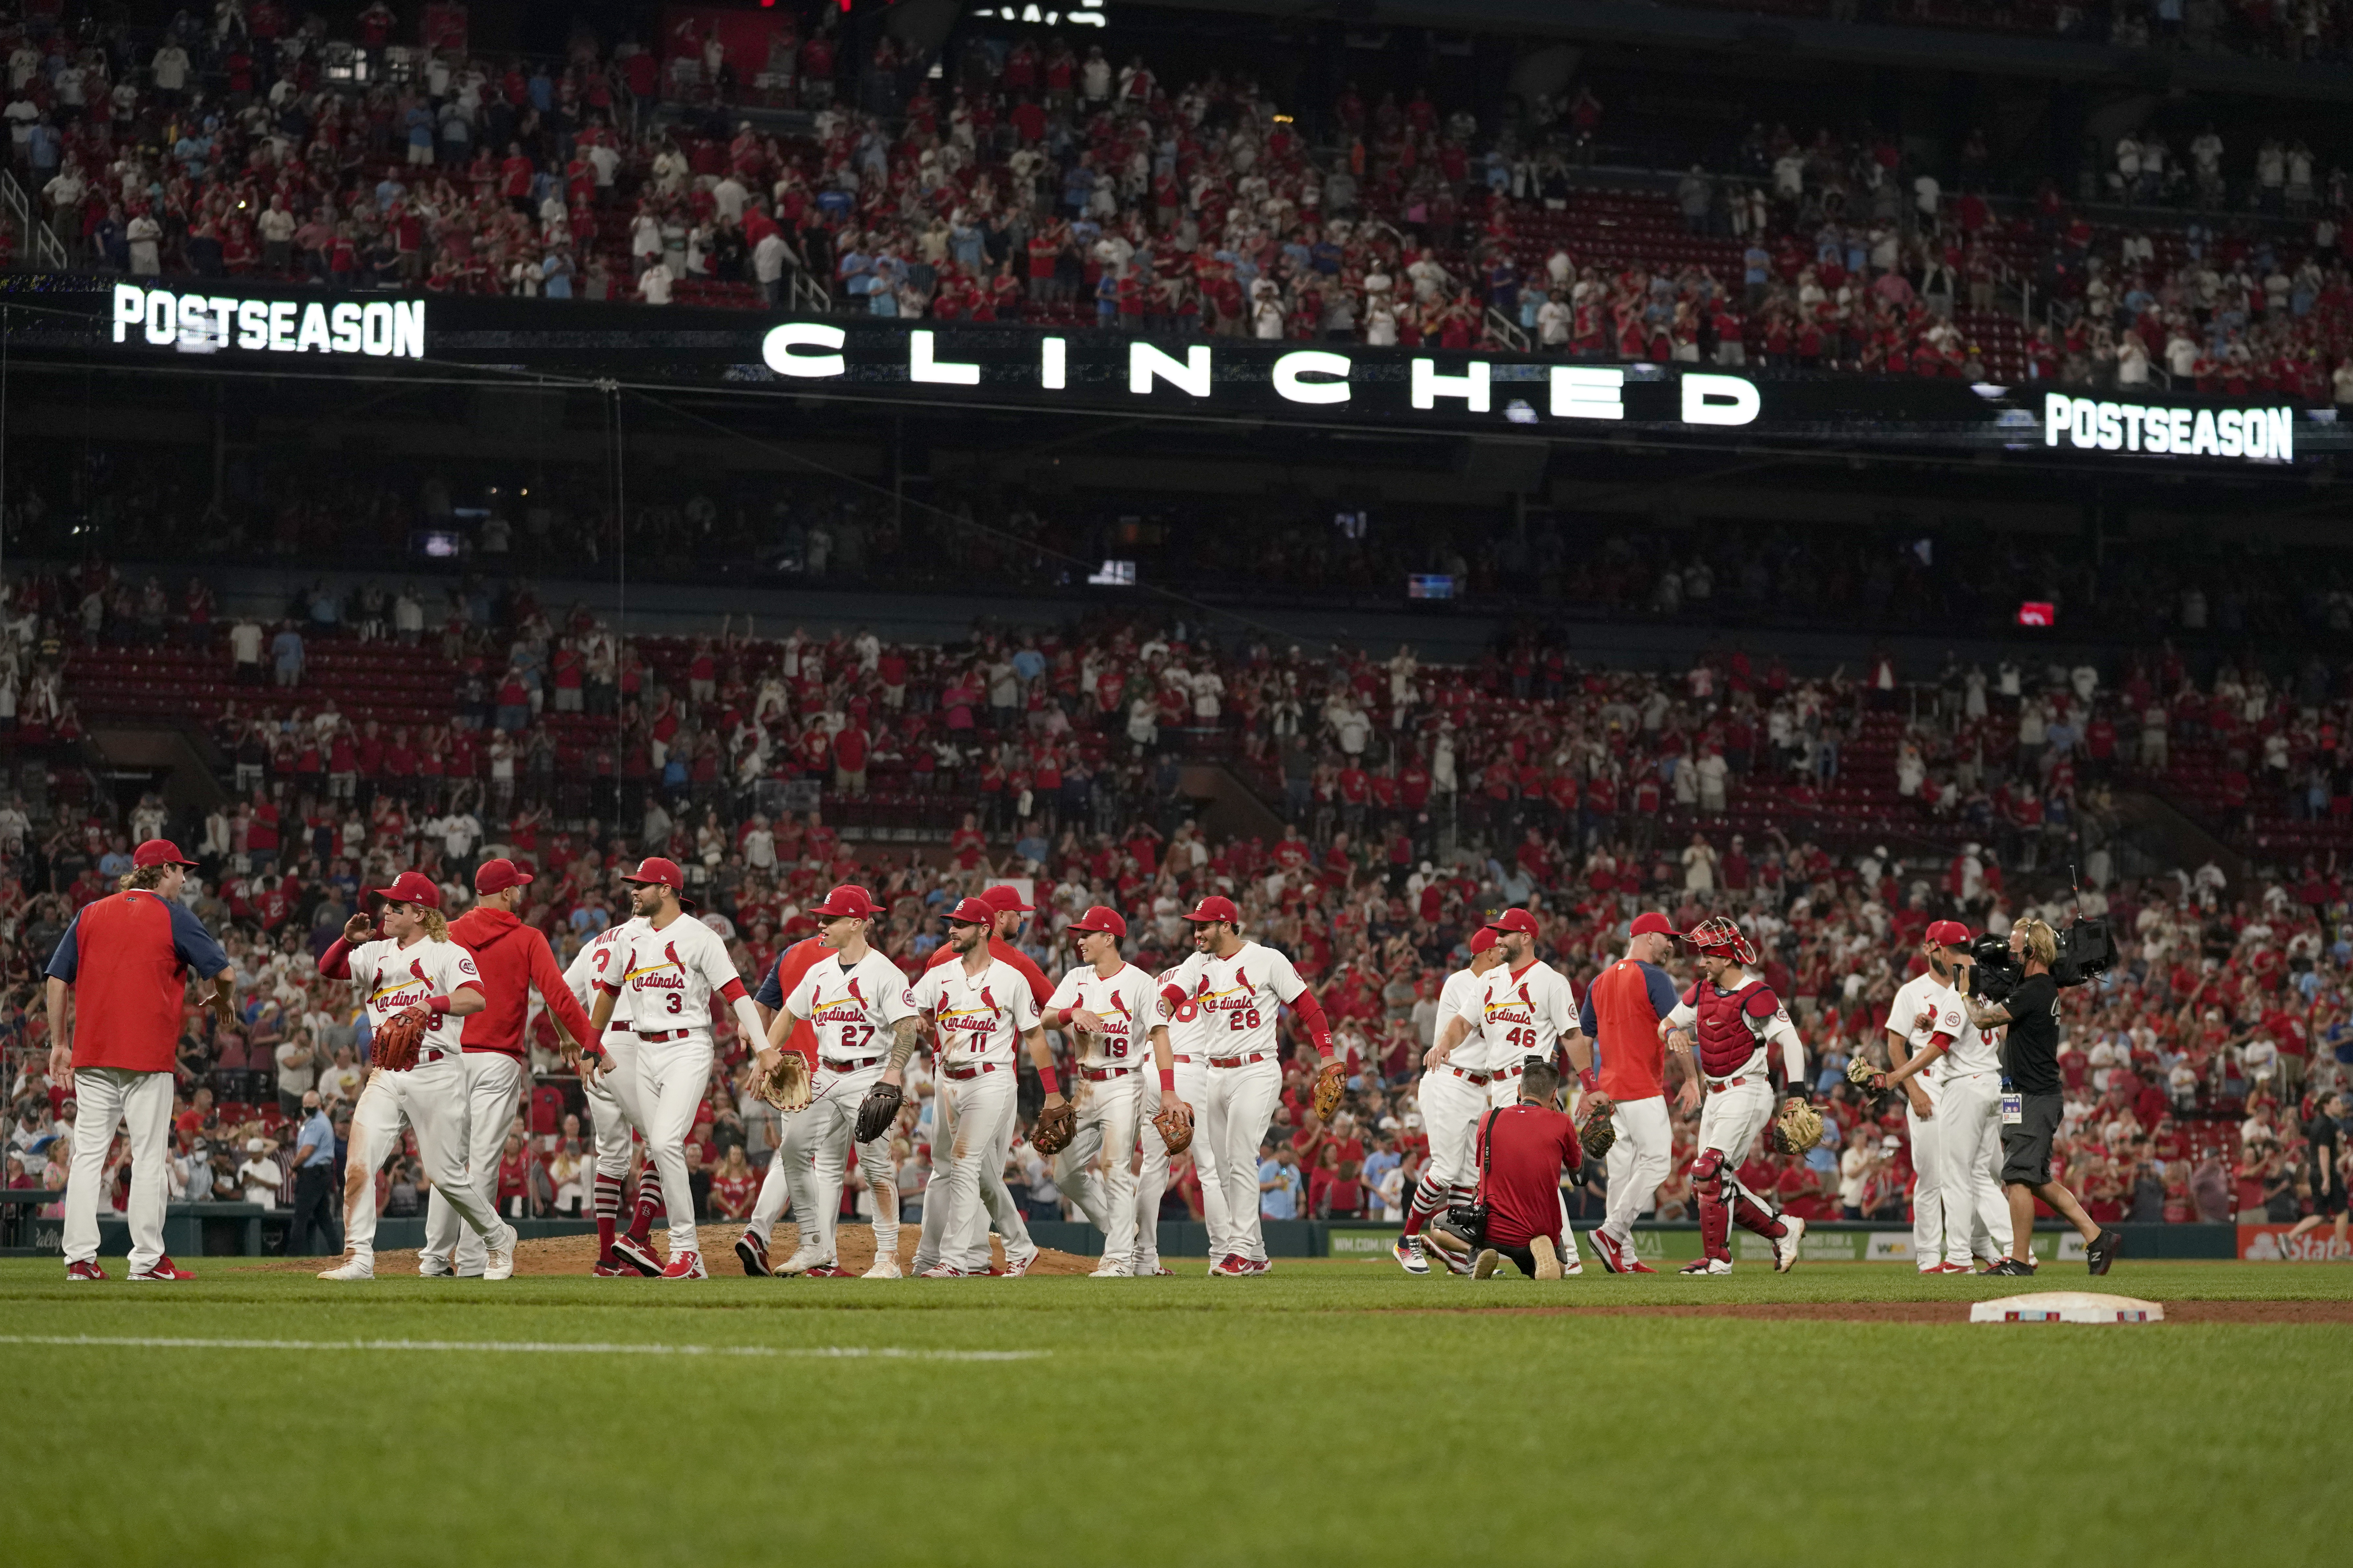 Cardinals beat Brewers for 17th straight win, clinch wild-card spot